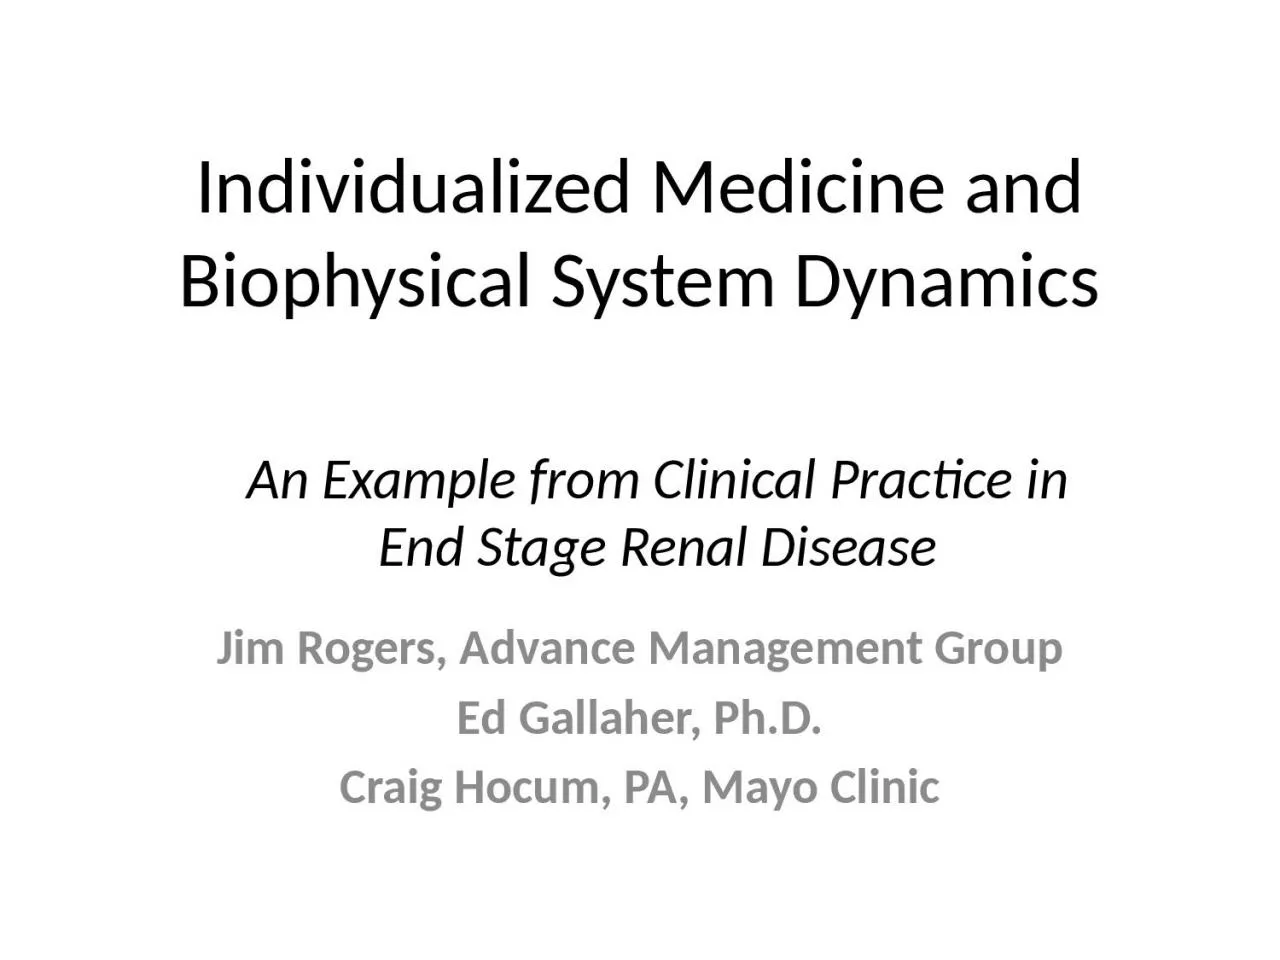 Individualized Medicine and Biophysical System Dynamics